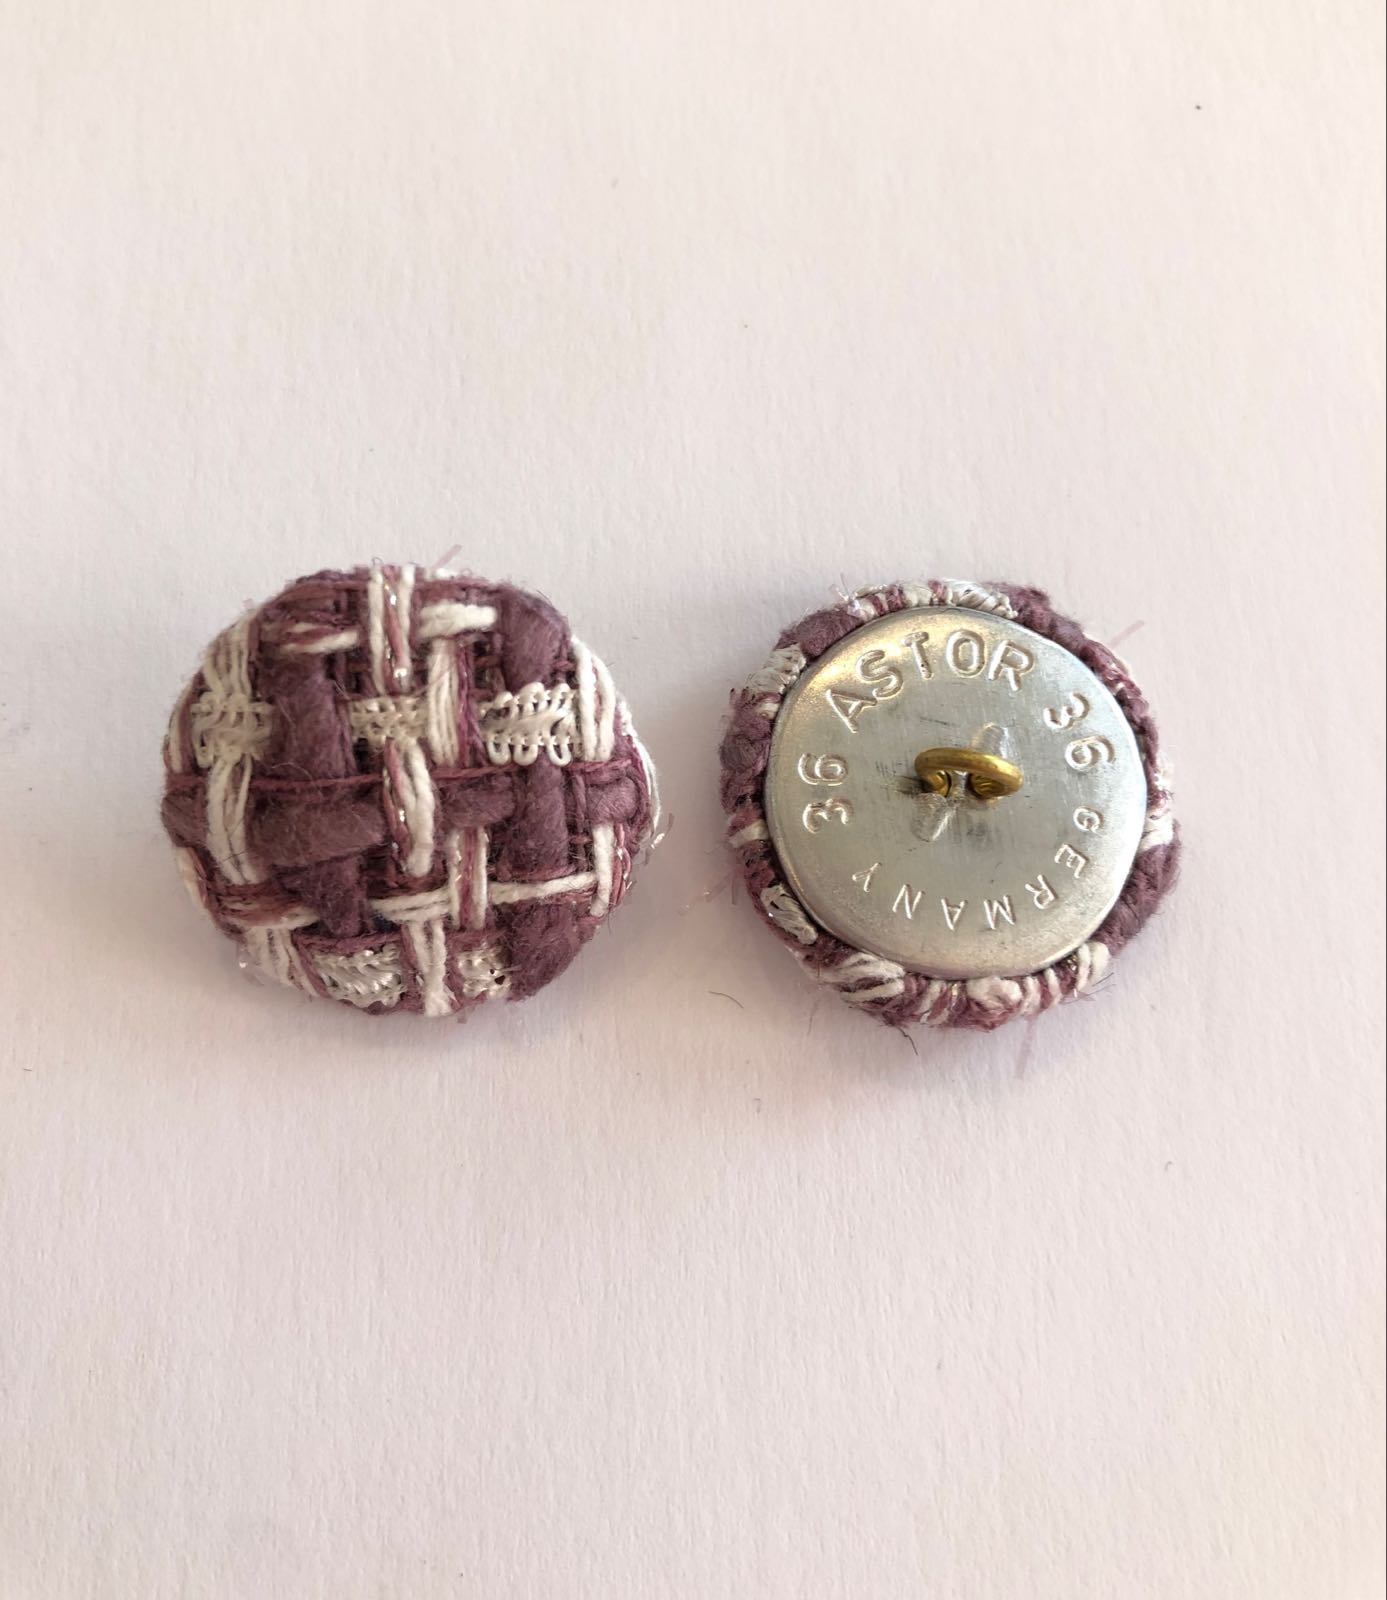 Fabric-covered button 24-40 mm